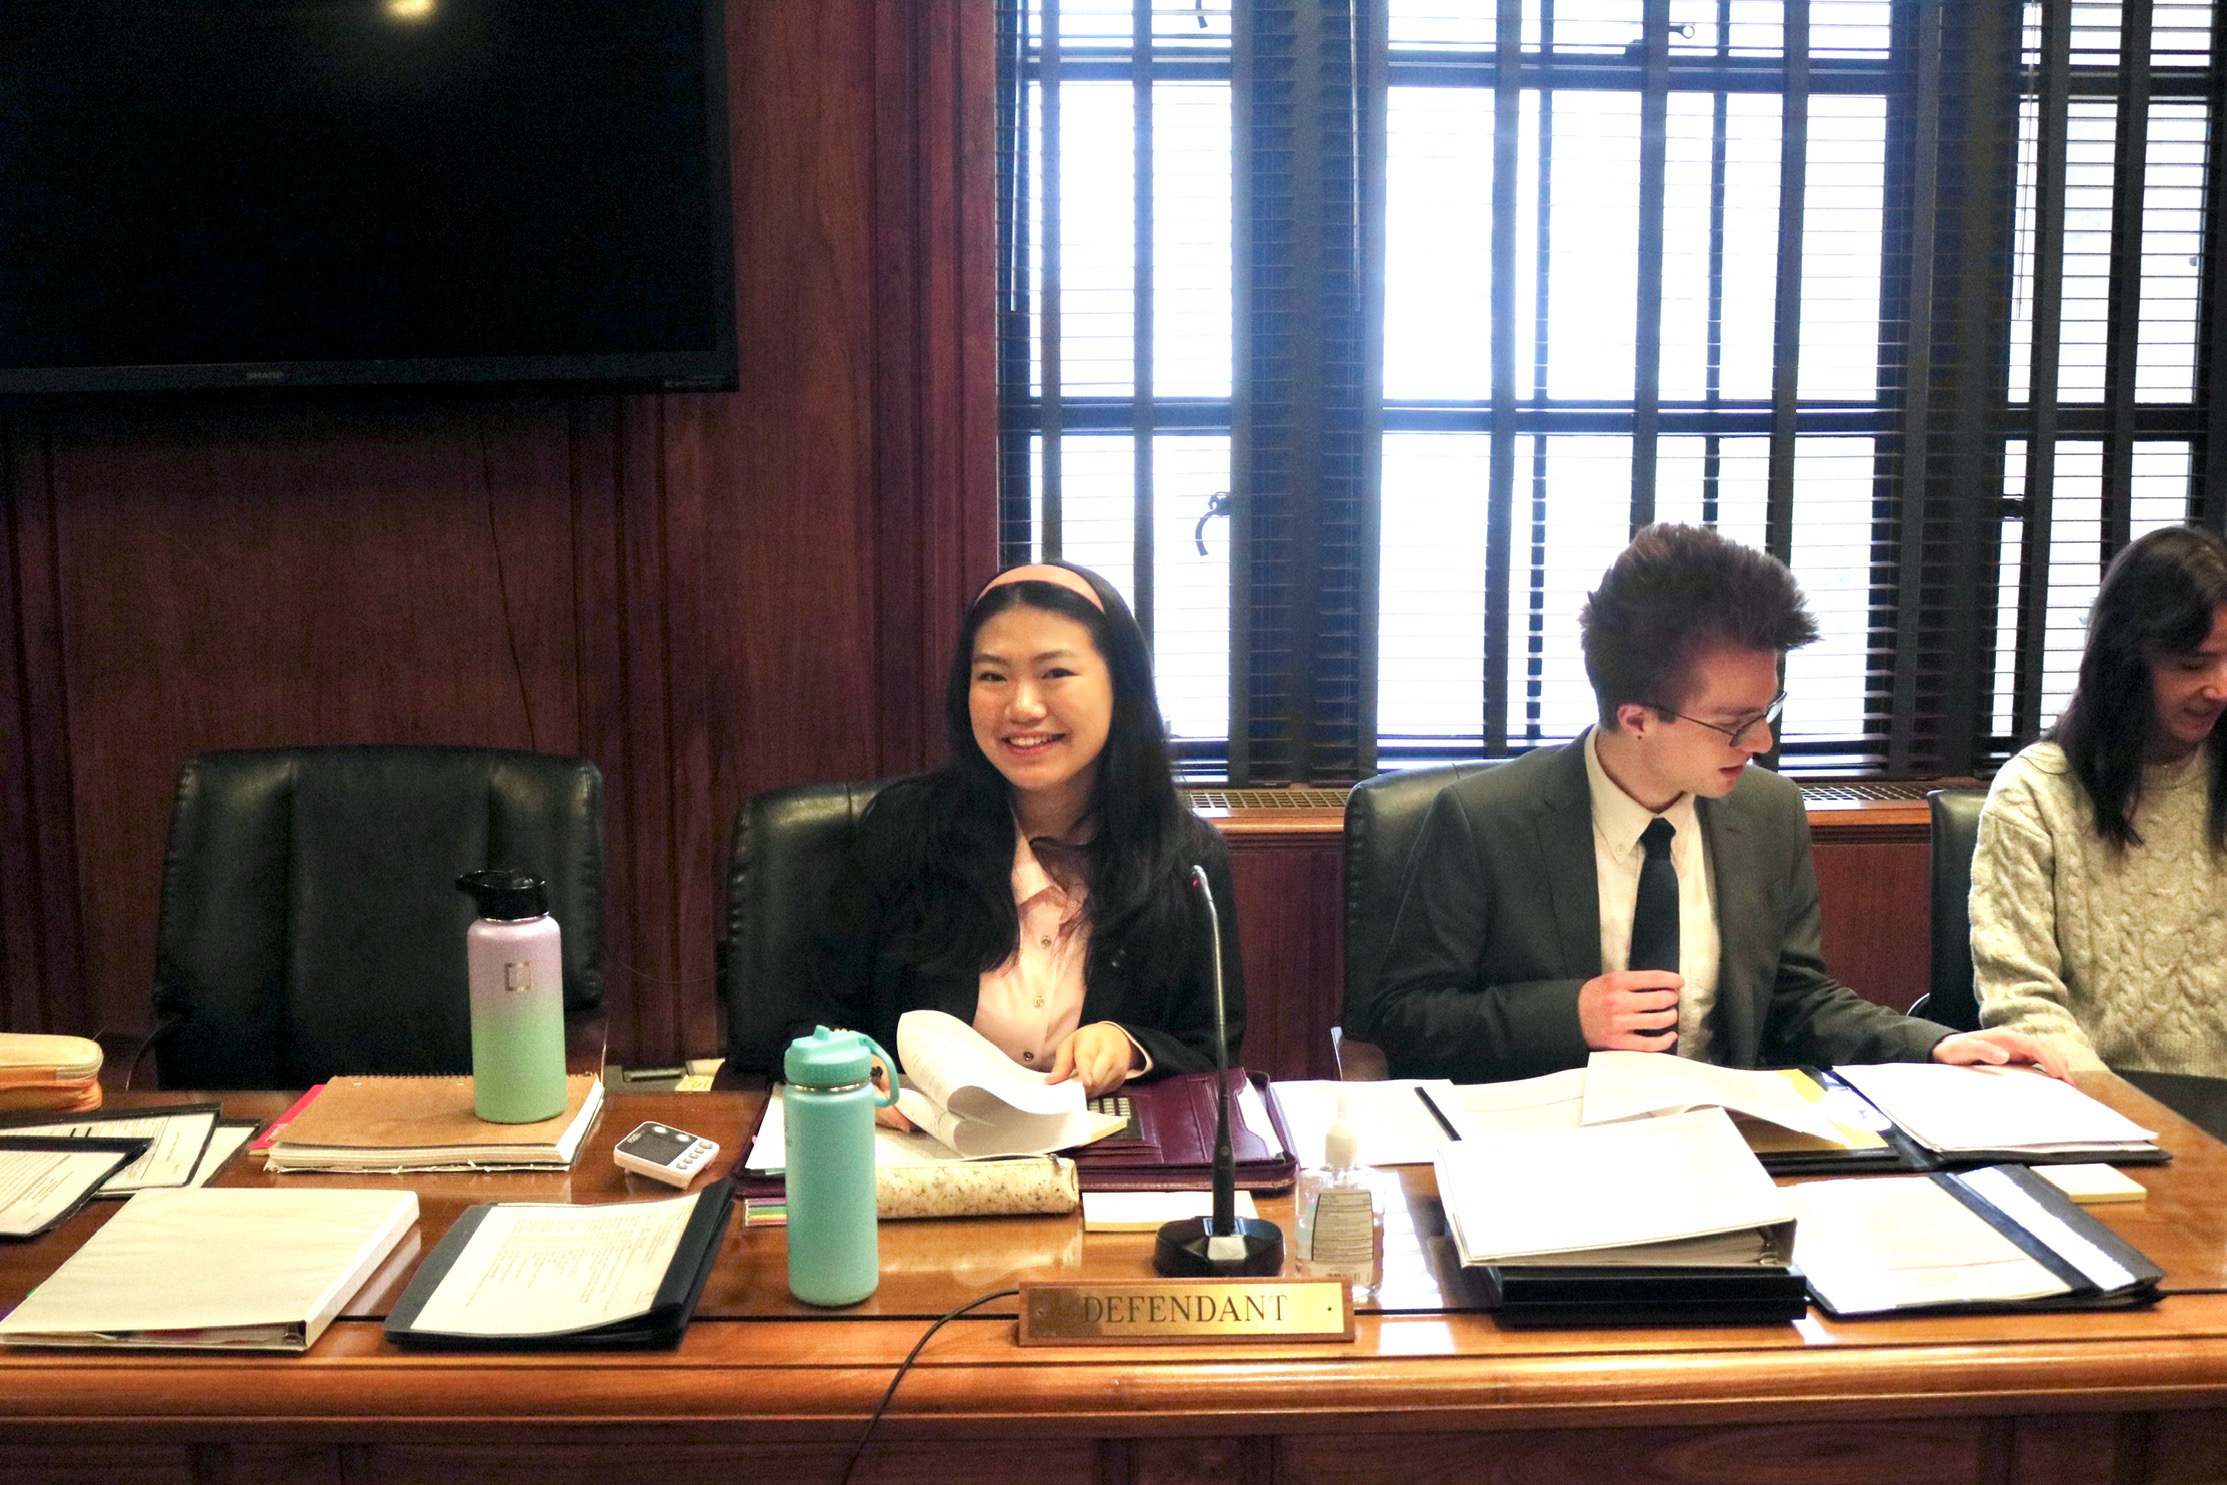 Jinhoung and two other students sitting at "Defendant" table for Mock Trial.